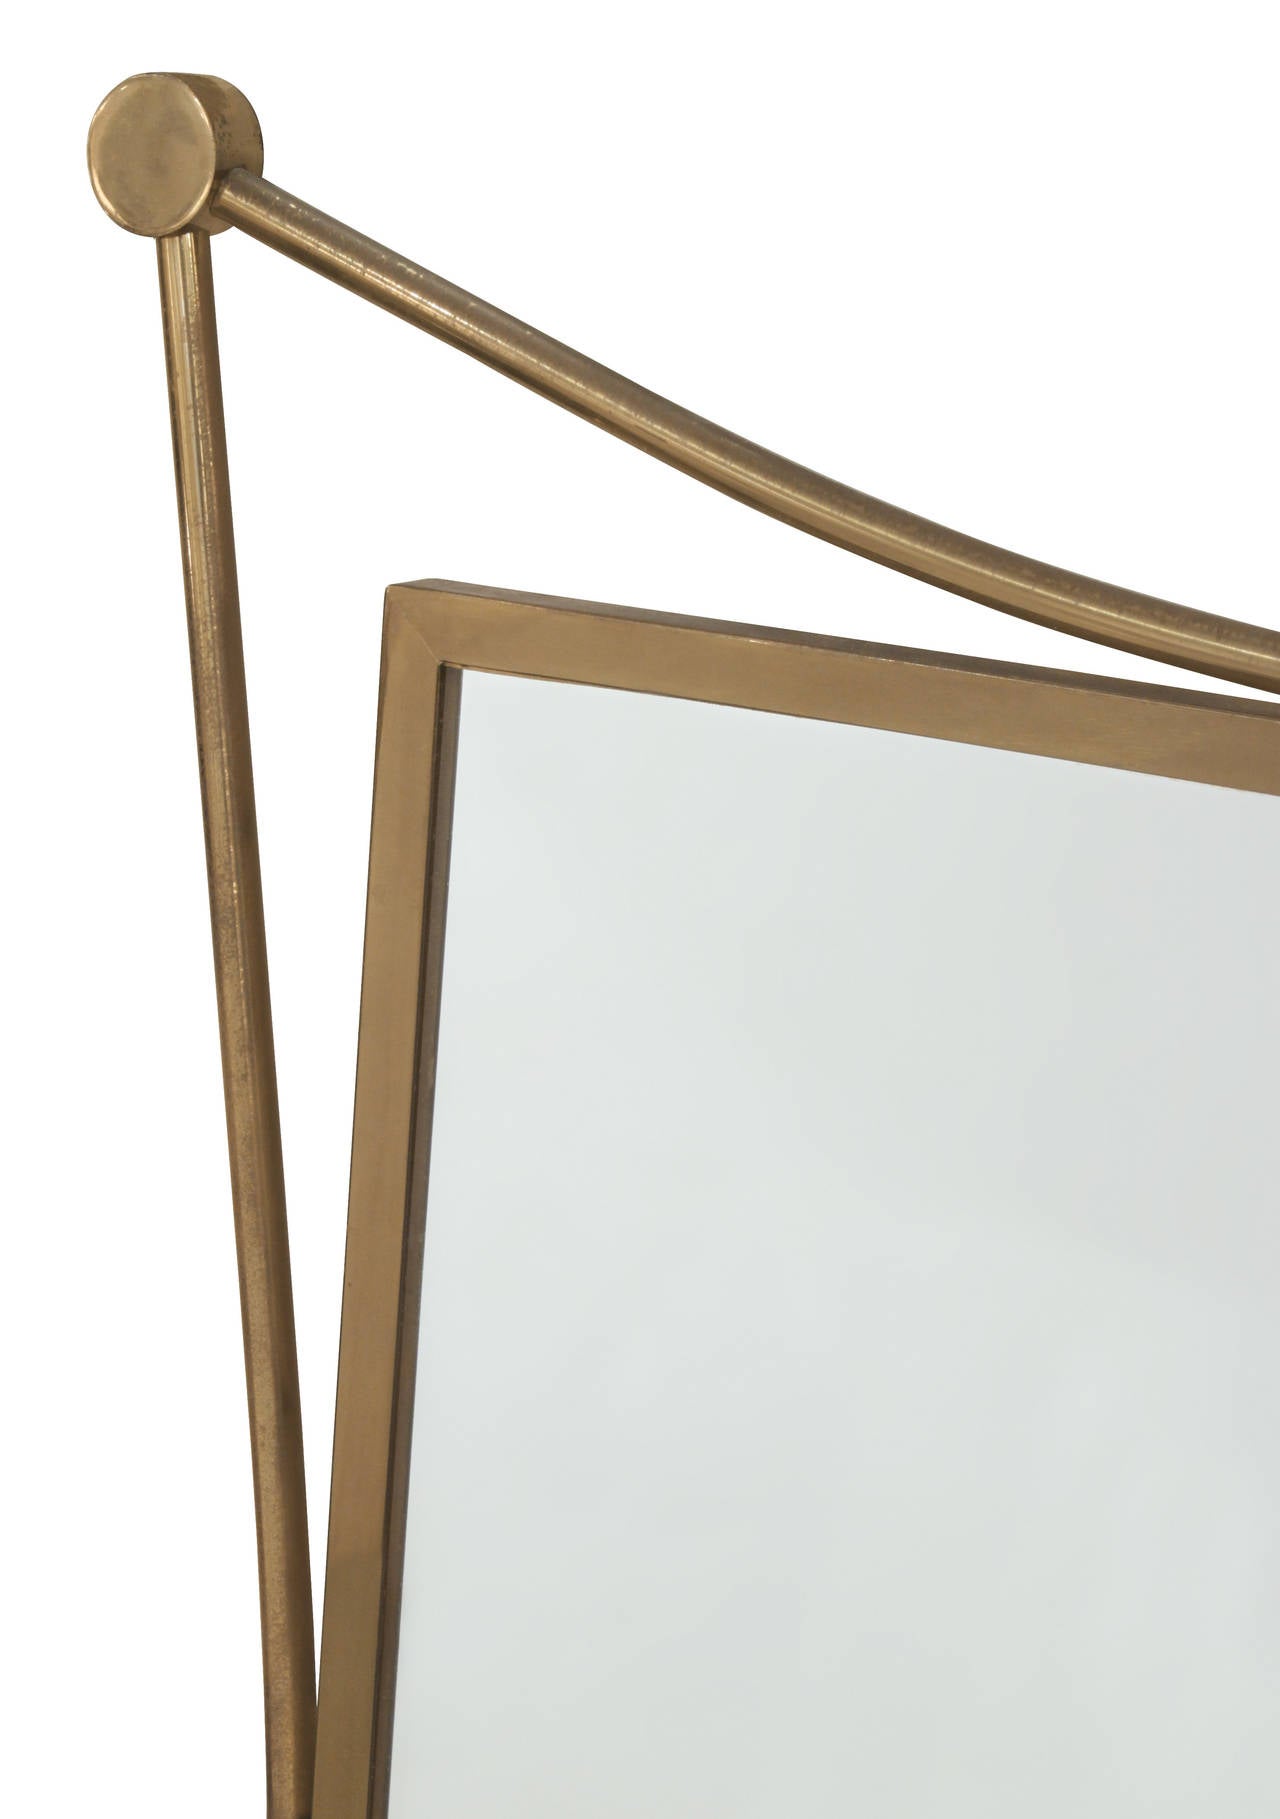 Mid-20th Century Atomic Style Rectangular Mirror with Frame in Brass